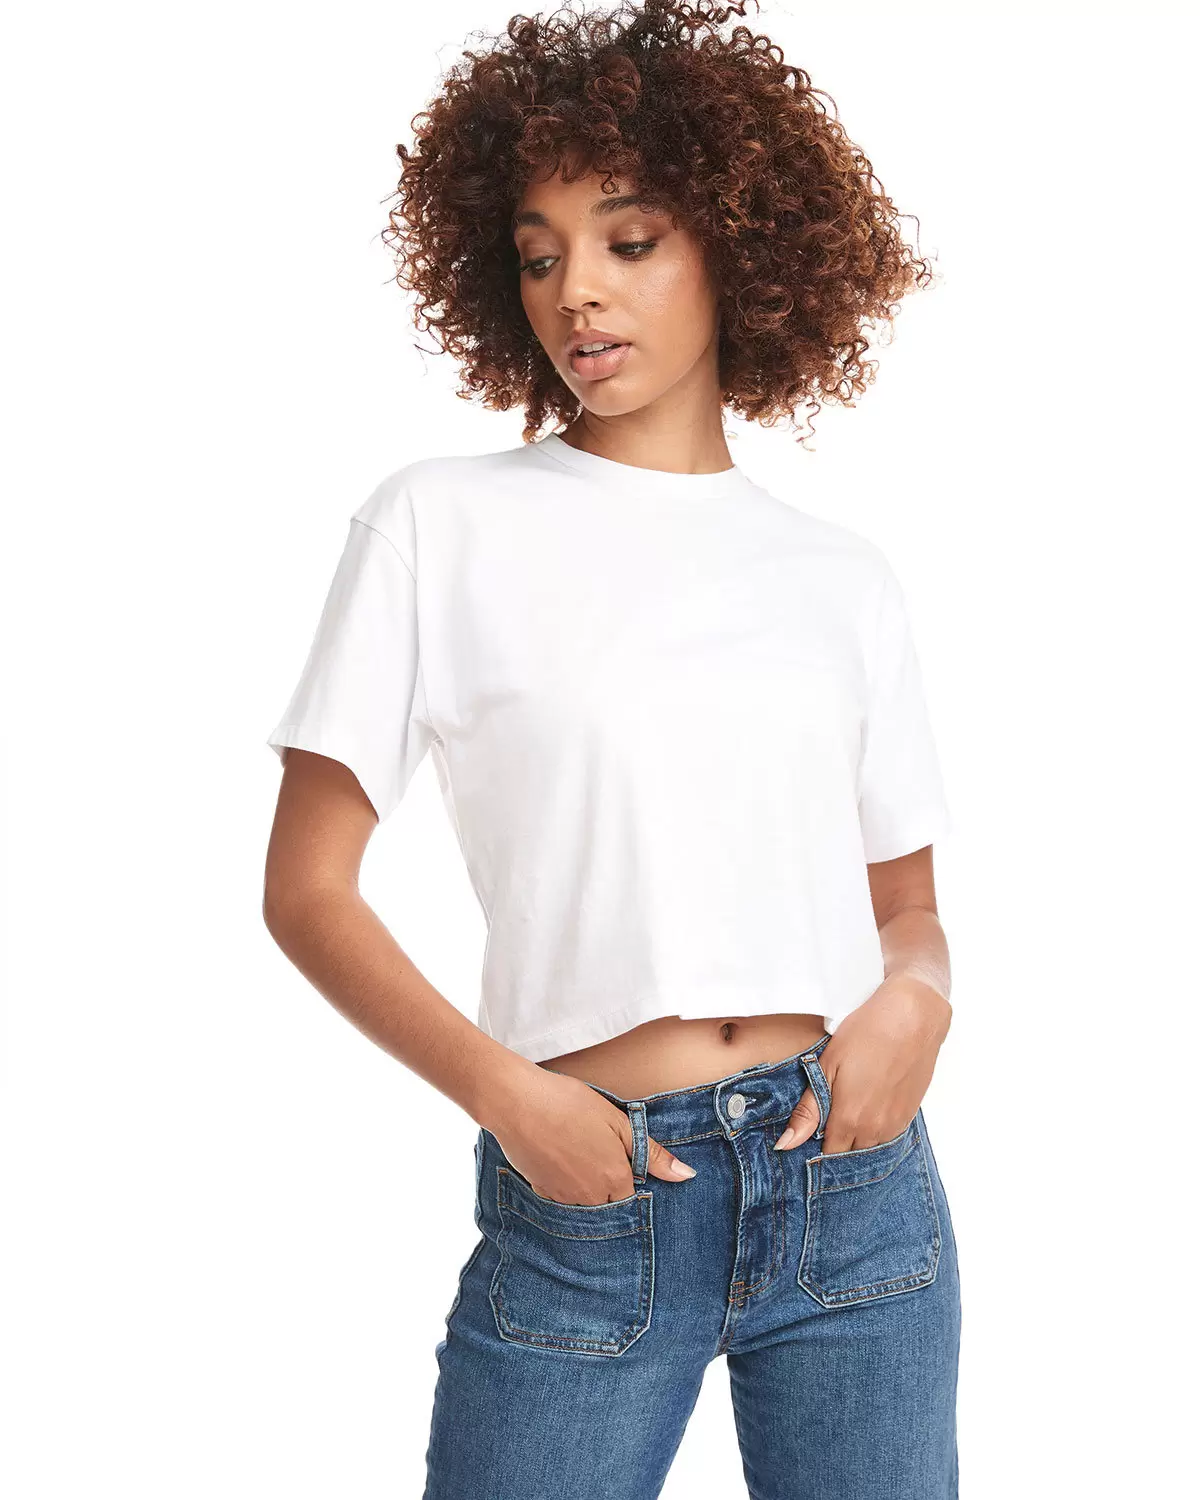 Next Level 1580 Womens Wholesale Crop Top T Shirt White - From $4.37